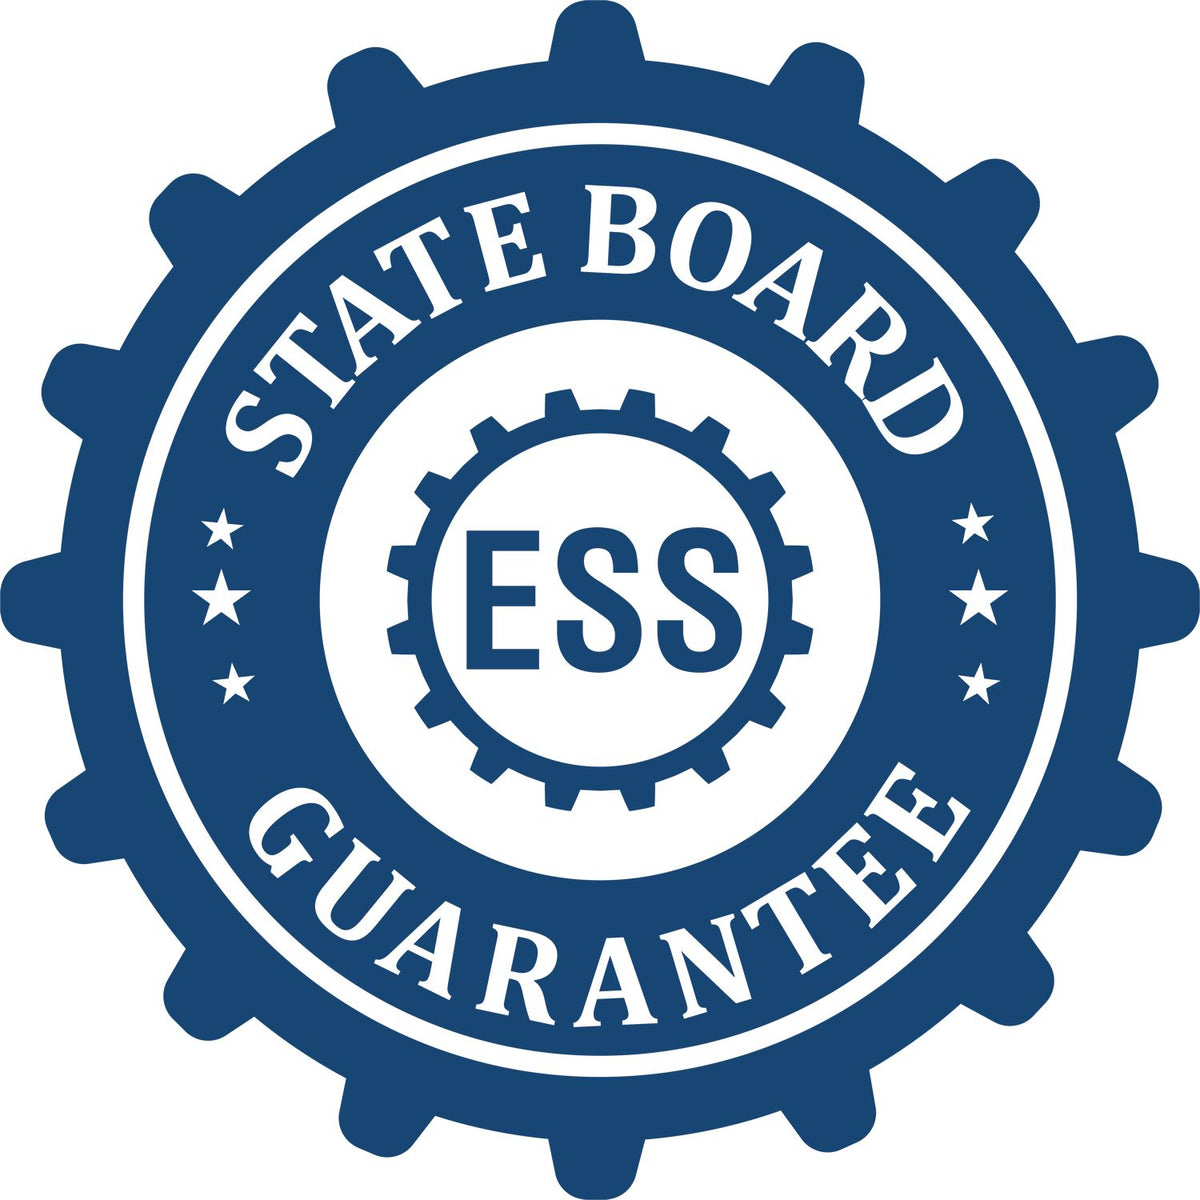 An emblem in a gear shape illustrating a state board guarantee for the Premium MaxLight Pre-Inked Florida Engineering Stamp product.